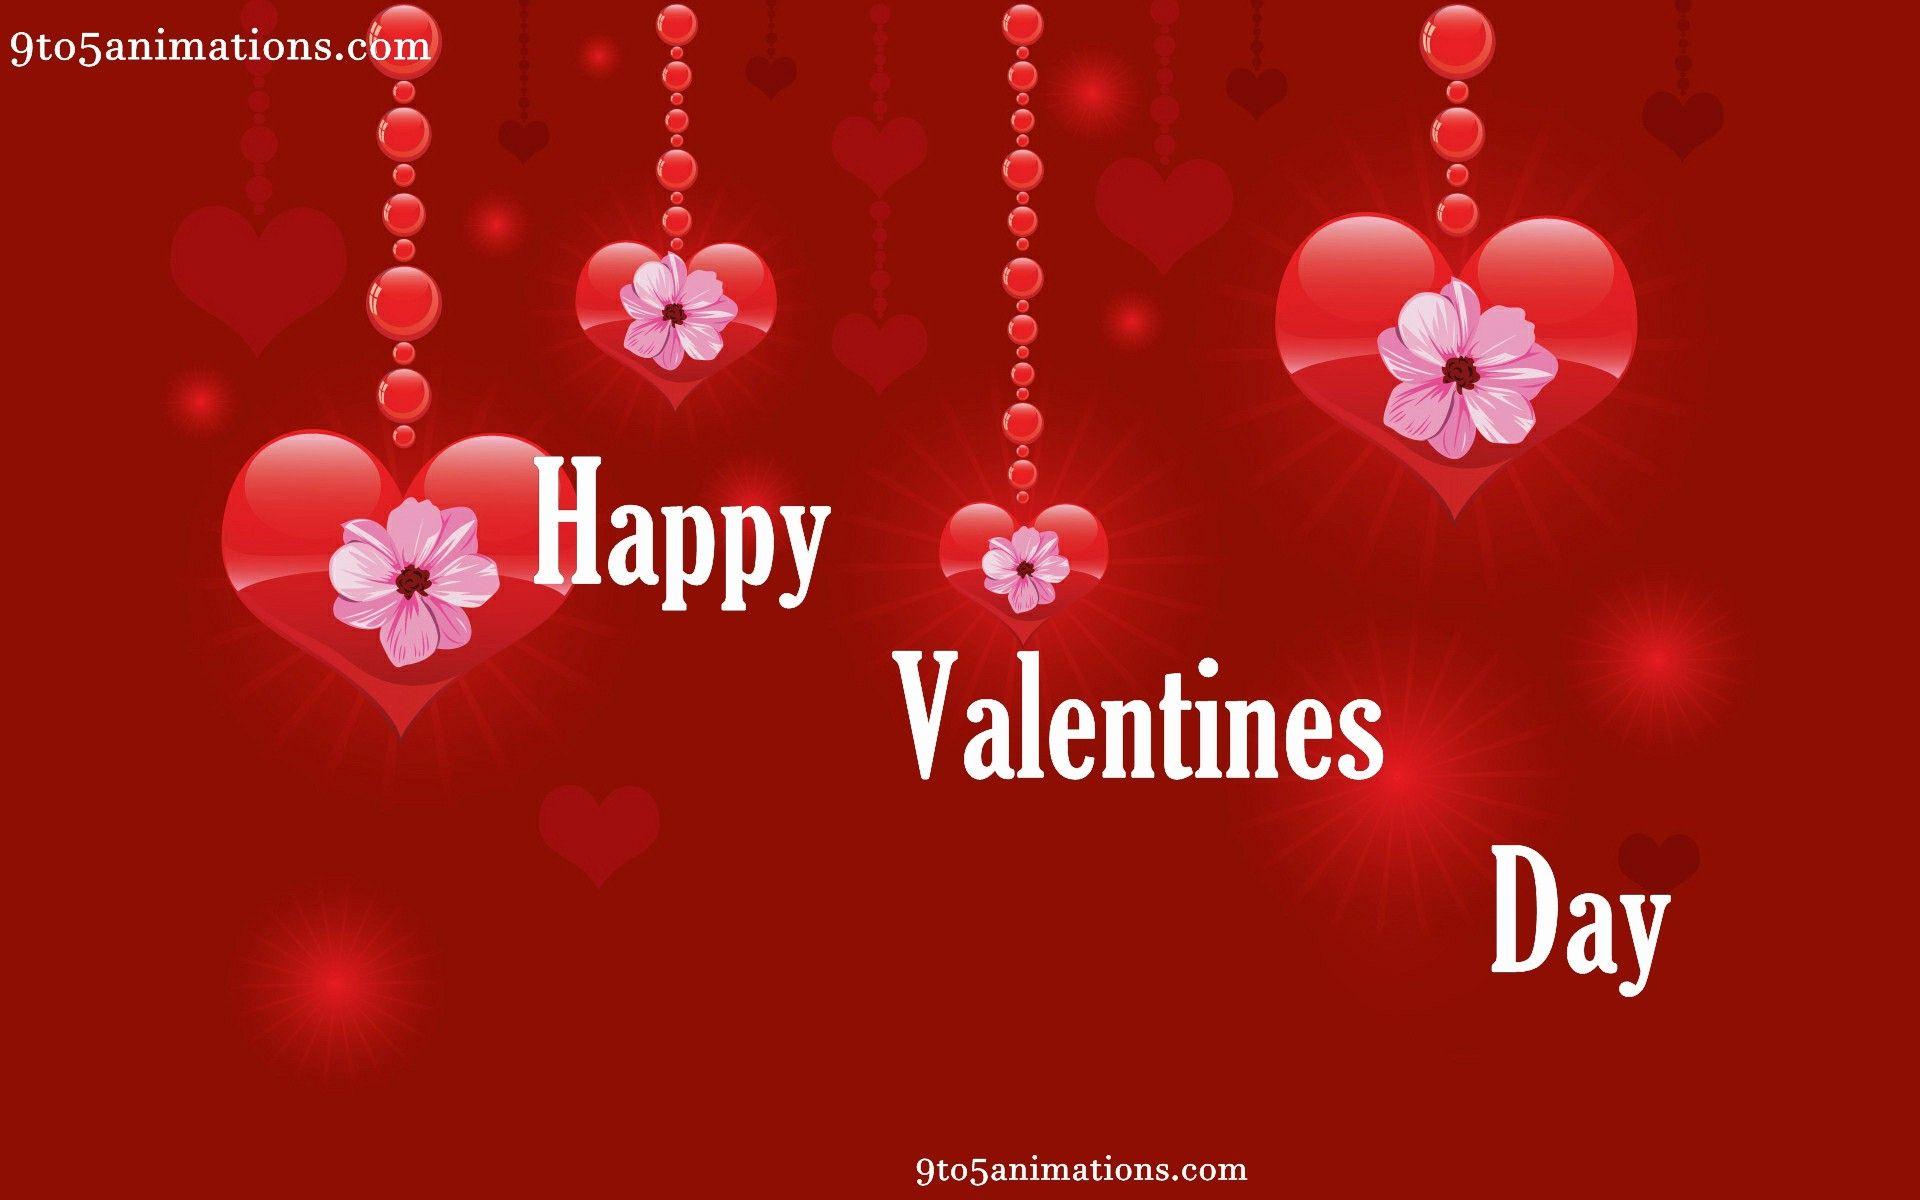 Happy Valentines Day My Love Wallpaper. To5Animations.Com